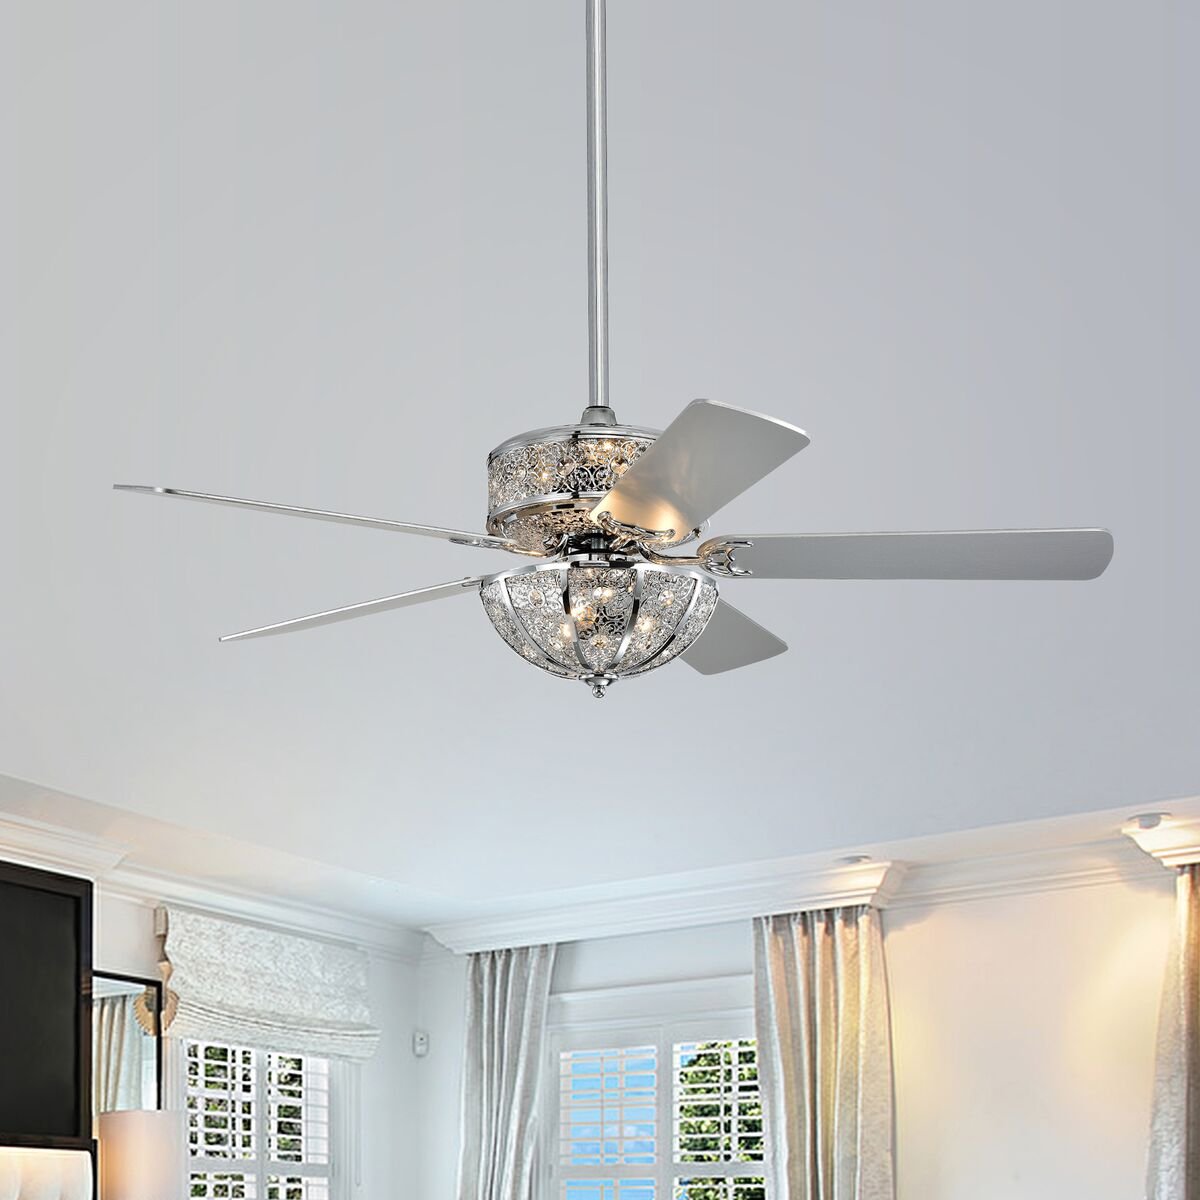 Picture of Warehouse of Tiffany CFL-8448REMO-CH 52 in. Karli Indoor Remote Controlled Ceiling Fan with Light Kit, Chrome